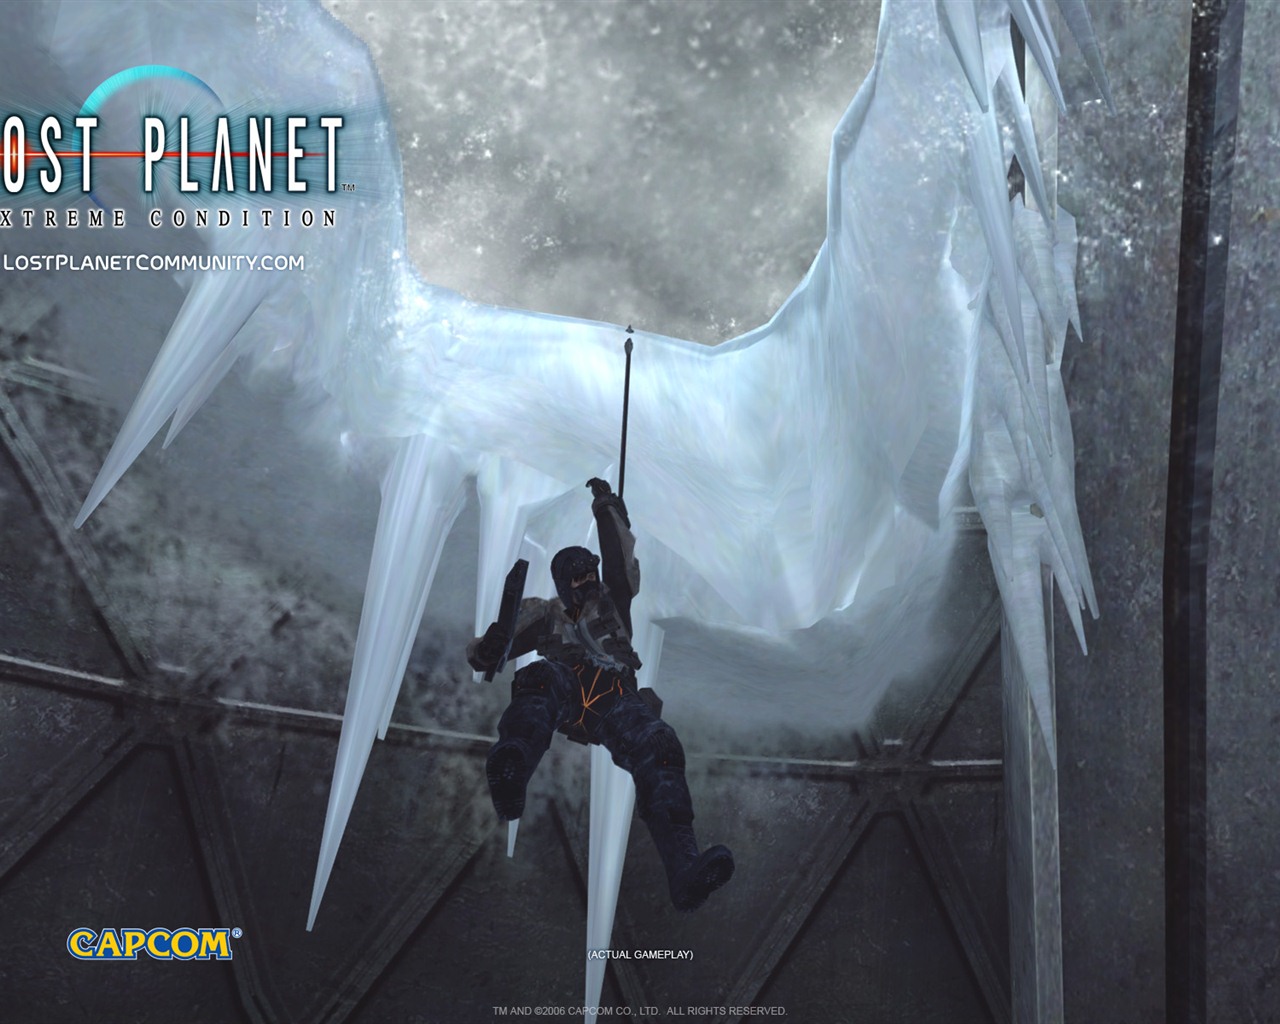 Lost Planet: Extreme Condition HD tapety na plochu #5 - 1280x1024